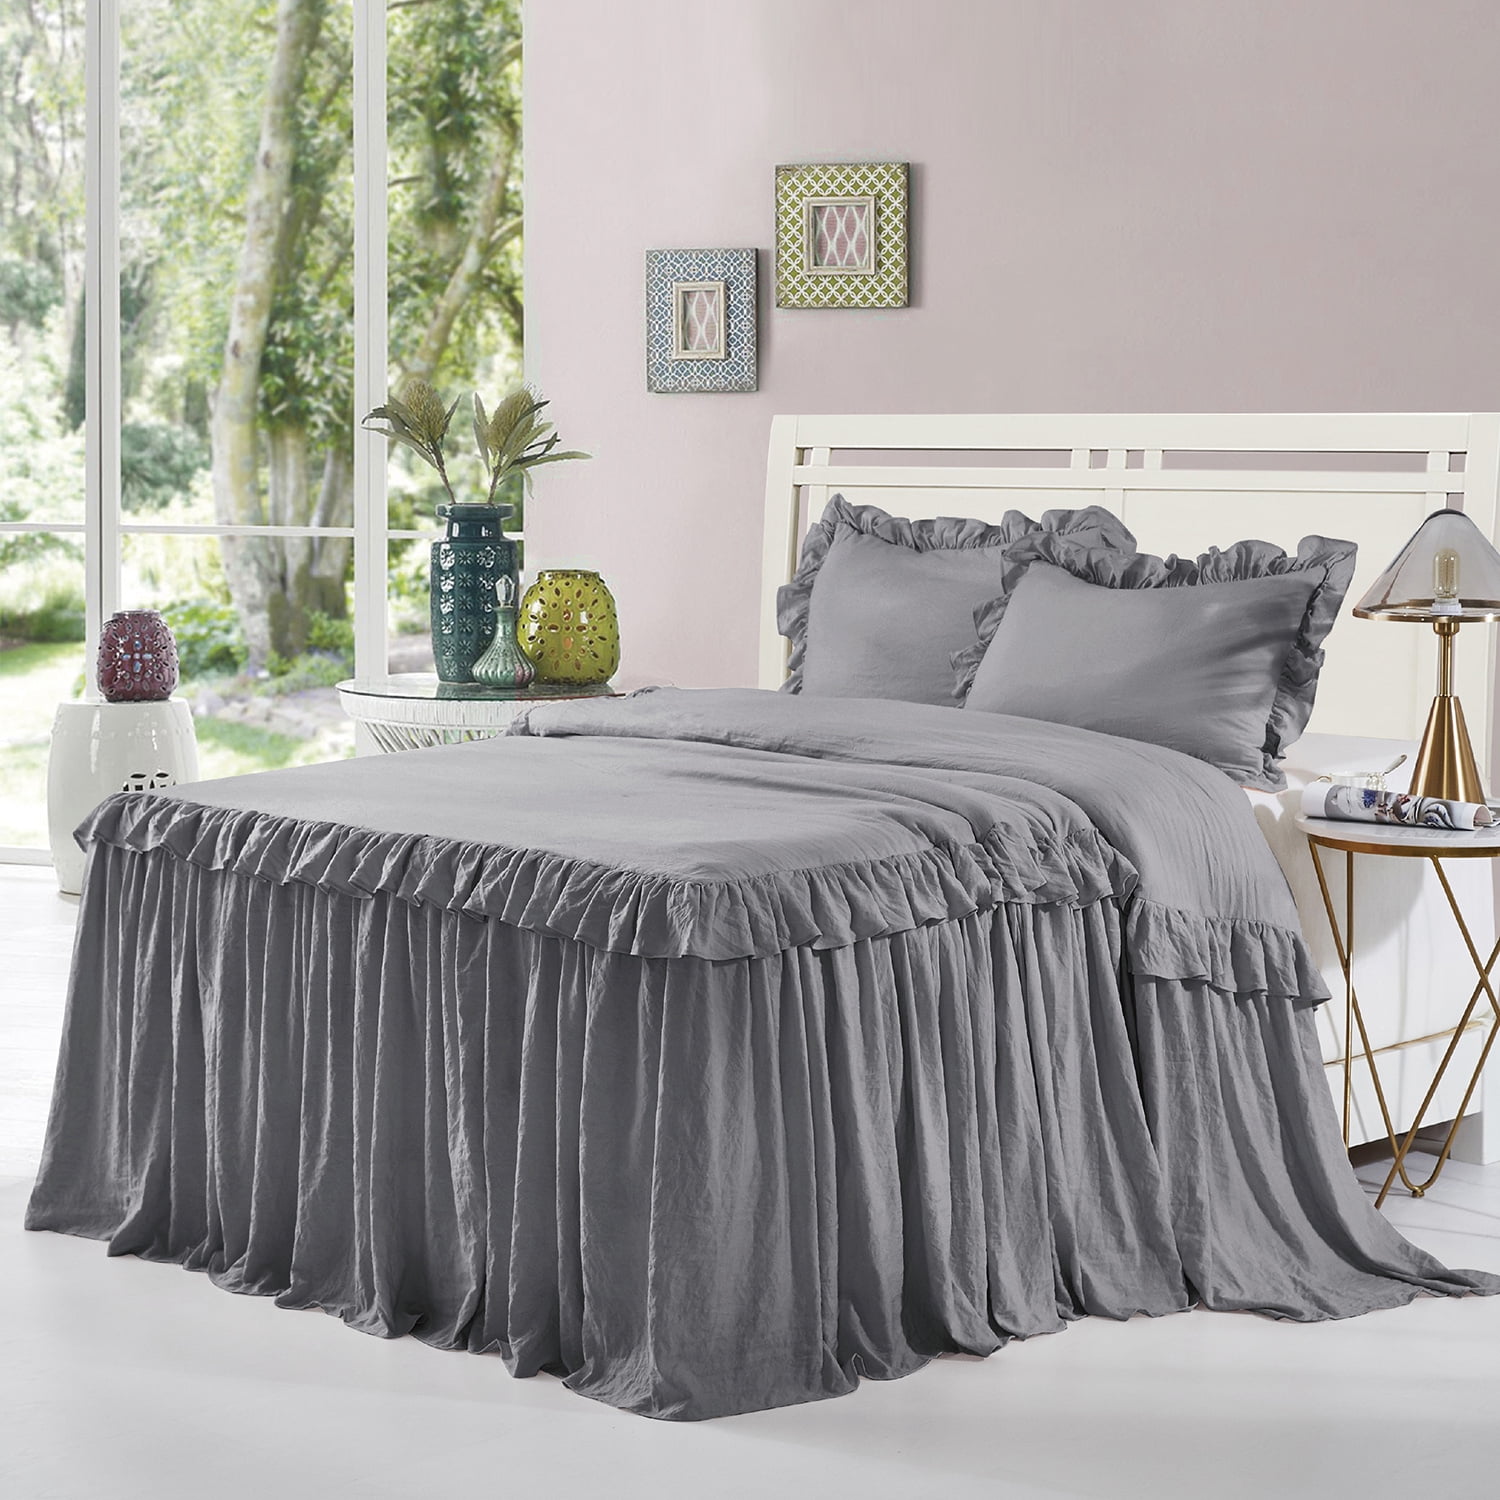 2 Standard Shams Emma Bedding Collections Queen Size-1 Bedspread HIG 3 Piece Ruffle Skirt Bedspread Set Queen-Navy Color 30 inches Drop Ruffled Style Bed Skirt Coverlets Bedspreads Dust Ruffles